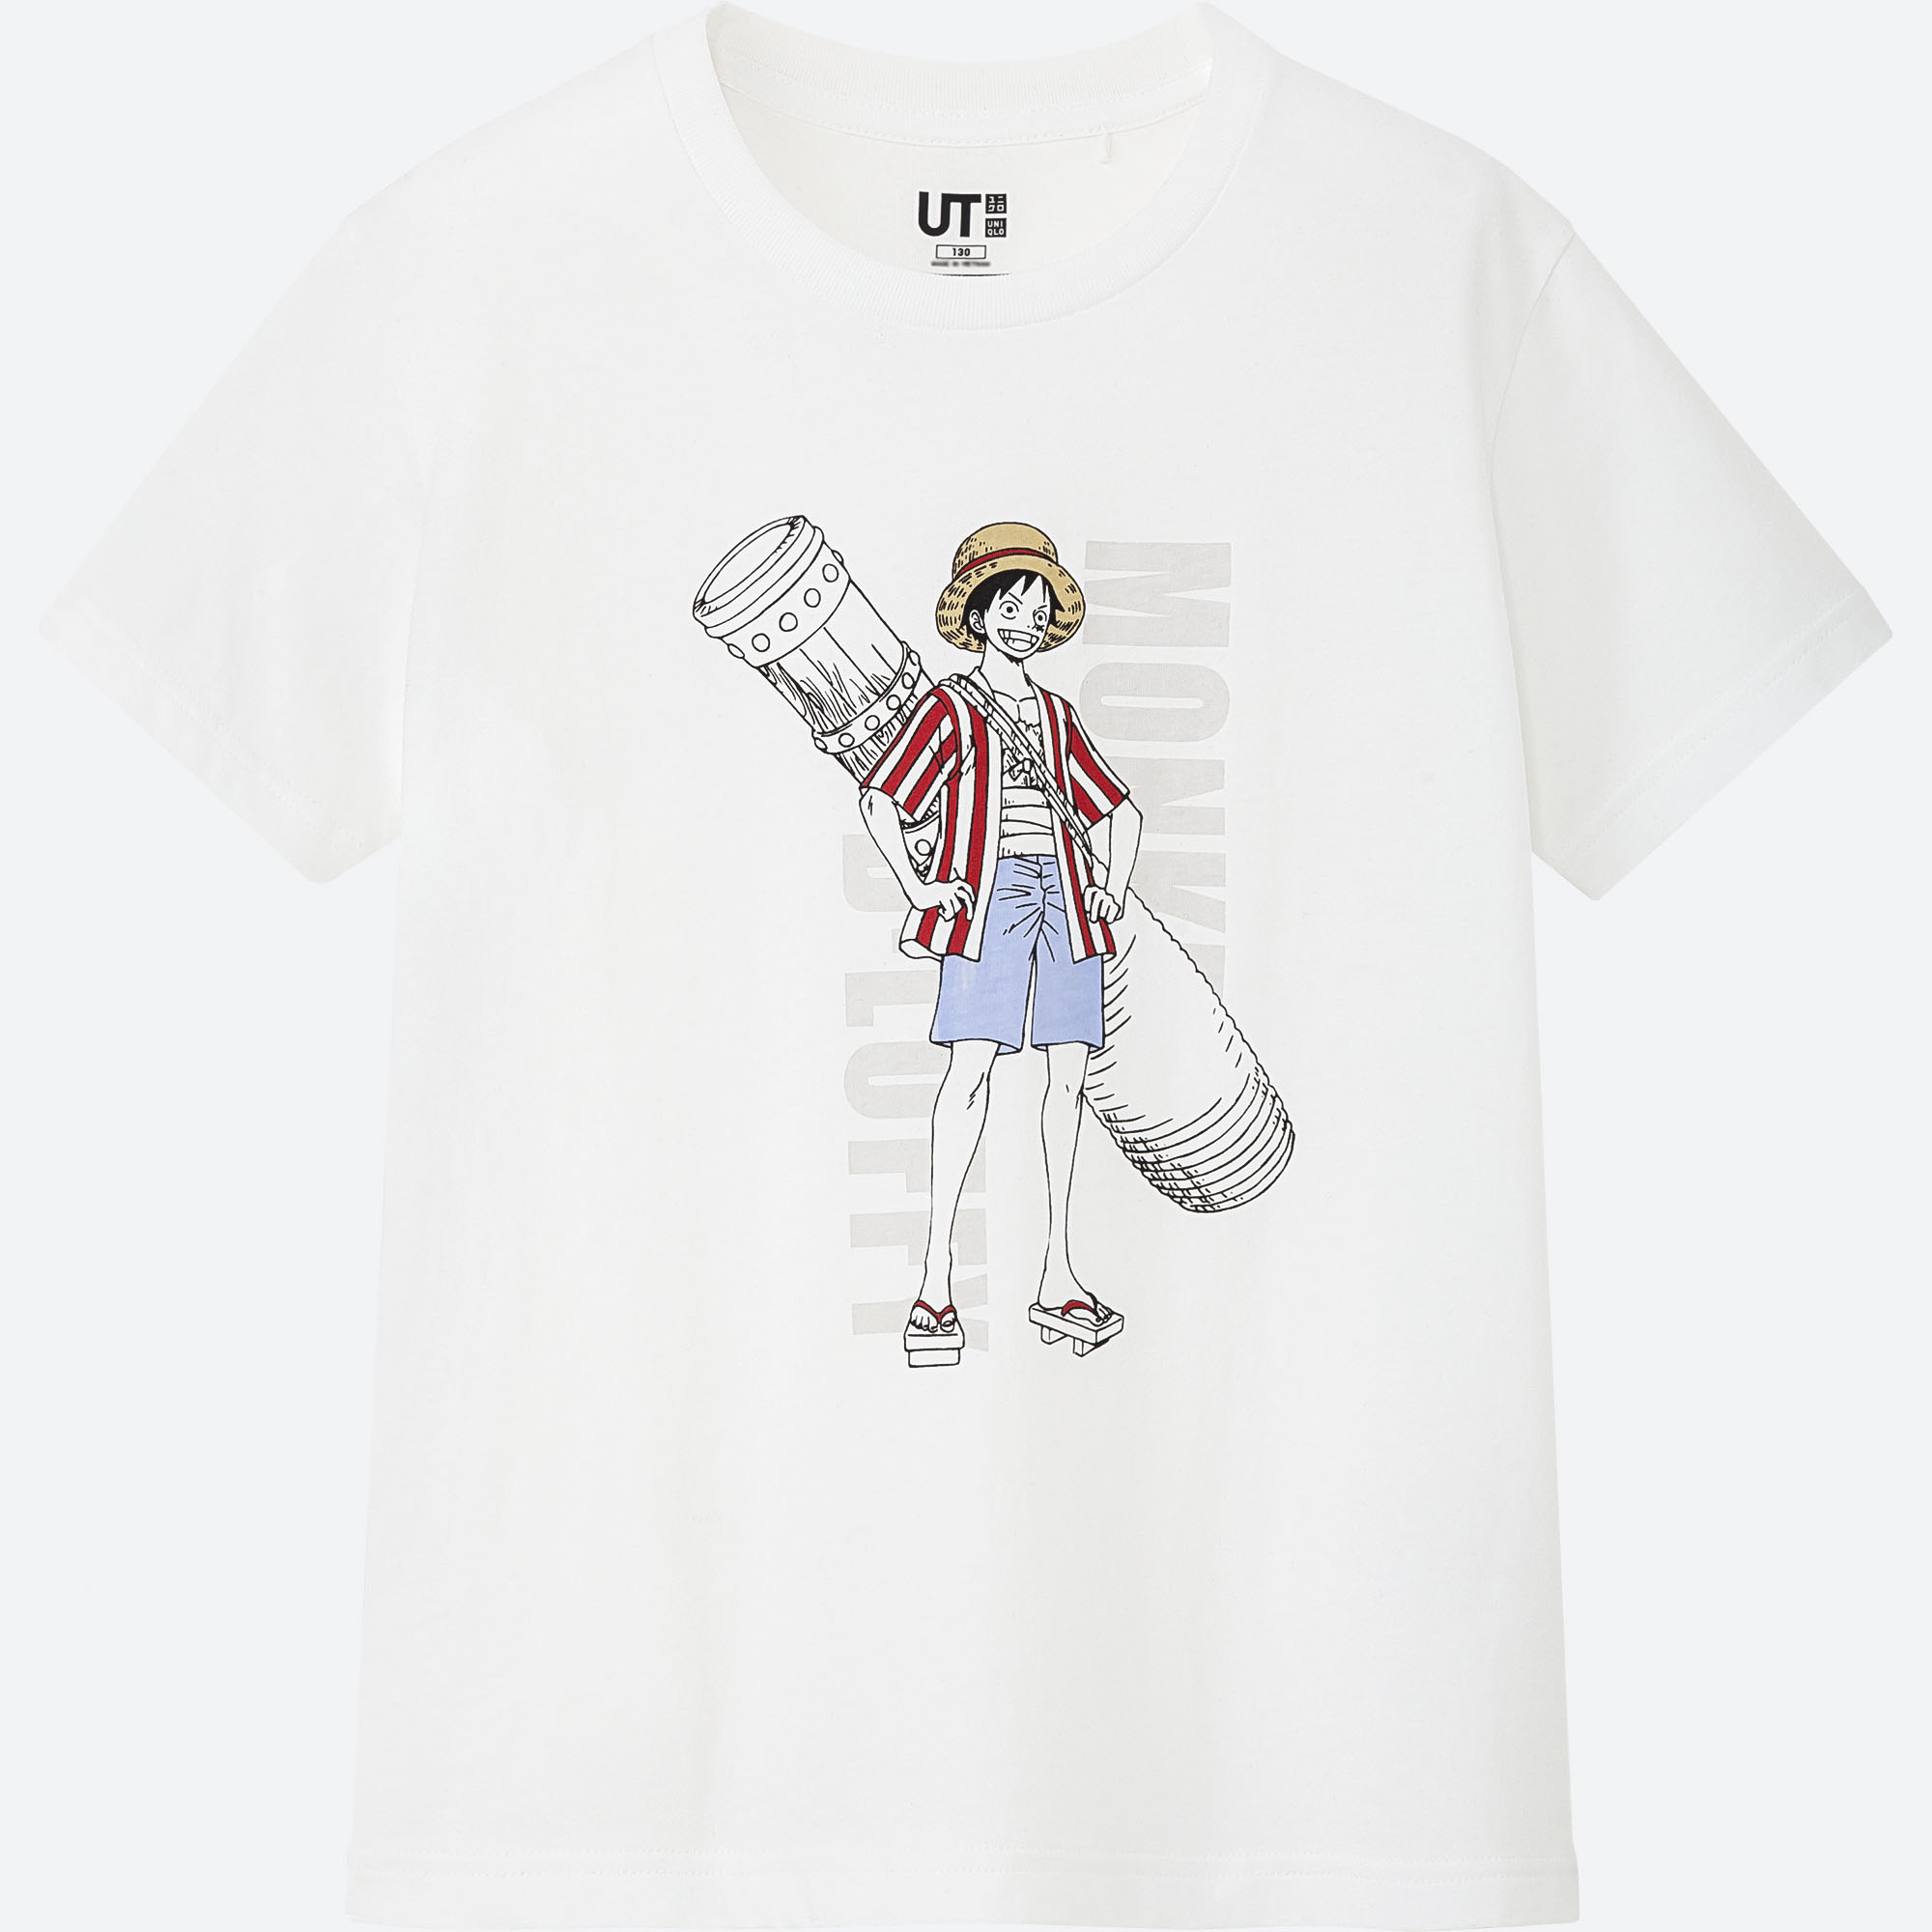 One Piece Luffy T-shirt Universal Studios Japan Limited Size